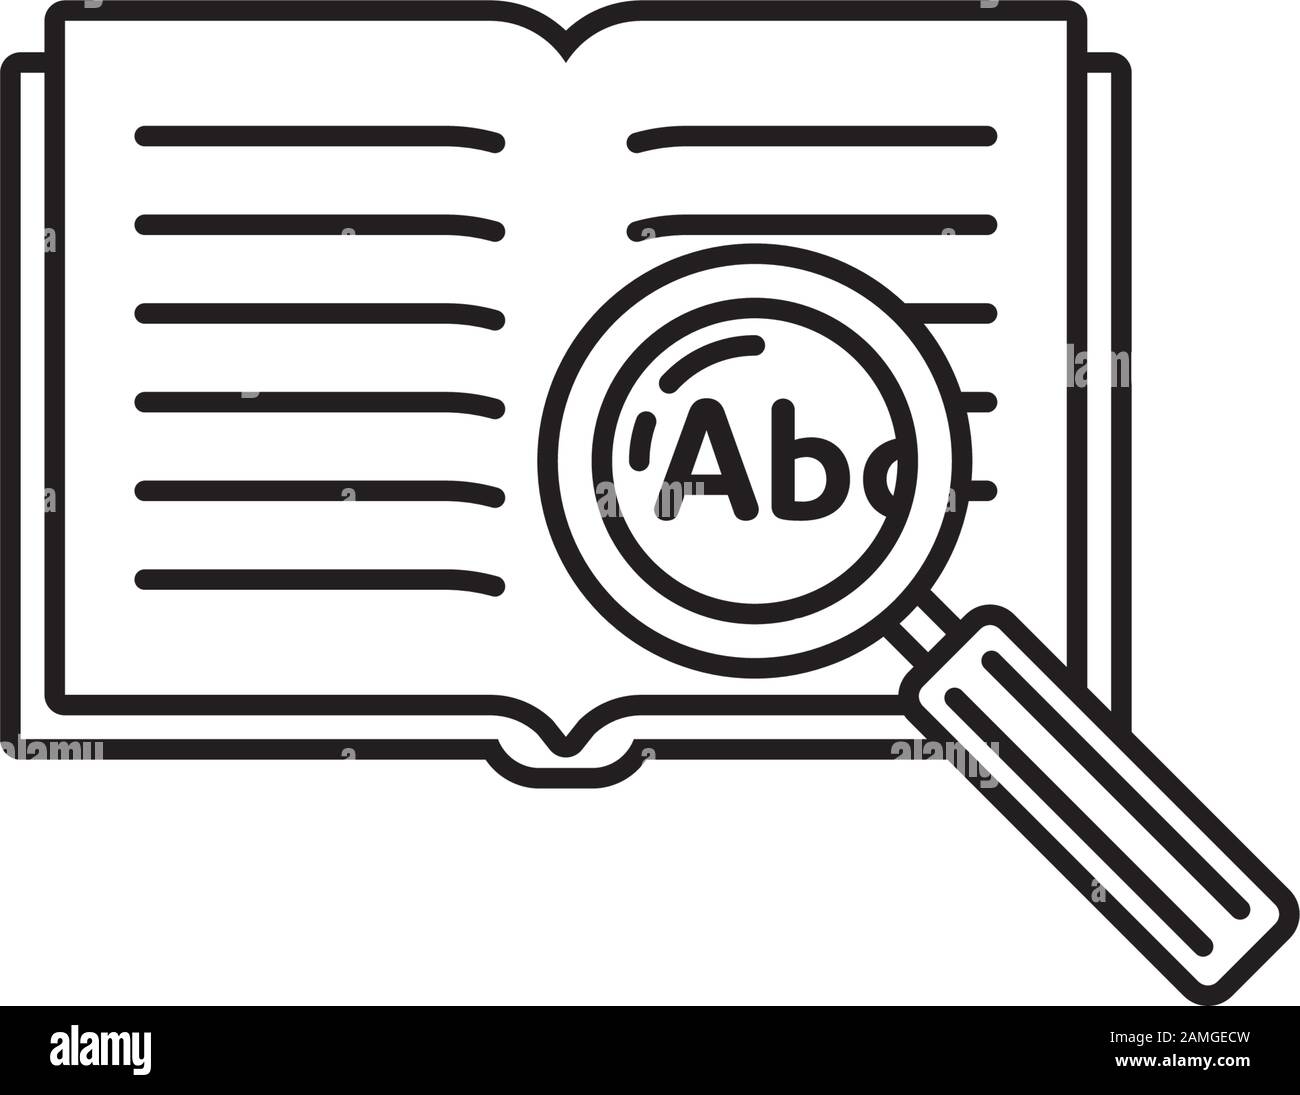 Thesaurus or encyclopedia with magnifying glass vector outline icon. Knowledge, learning and education symbol. Stock Vector